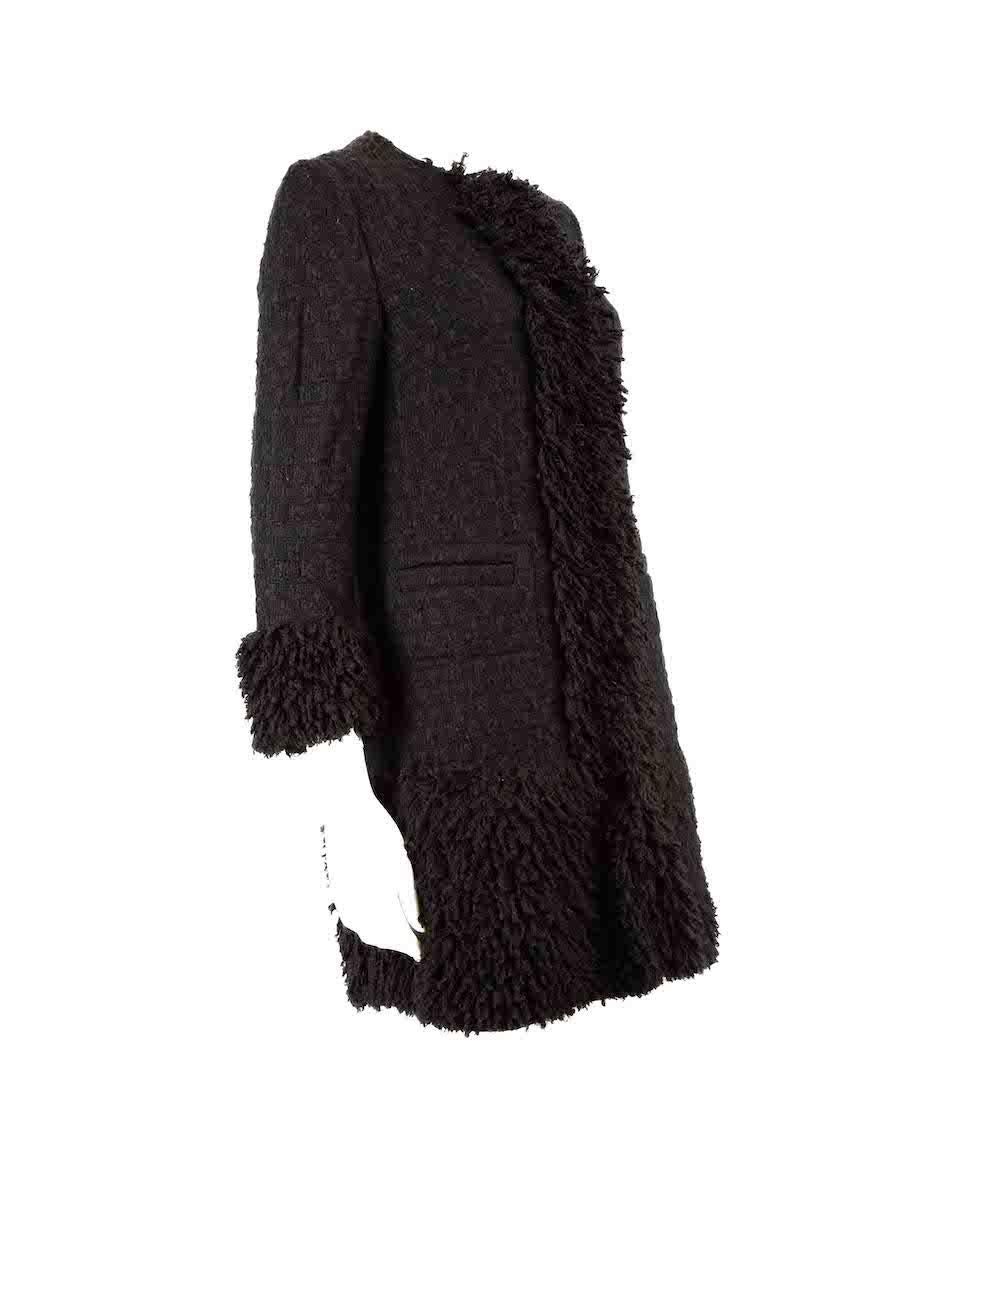 CONDITION is Very good. Minimal wear to coat is evident. Minimal wear to overall coat with slight pilling seen on this used Dolce & Gabbana designer resale item.
 
 
 
 Details
 
 
 Black
 
 Tweed
 
 Mid length coat
 
 Tassel trimmed
 
 Front snap